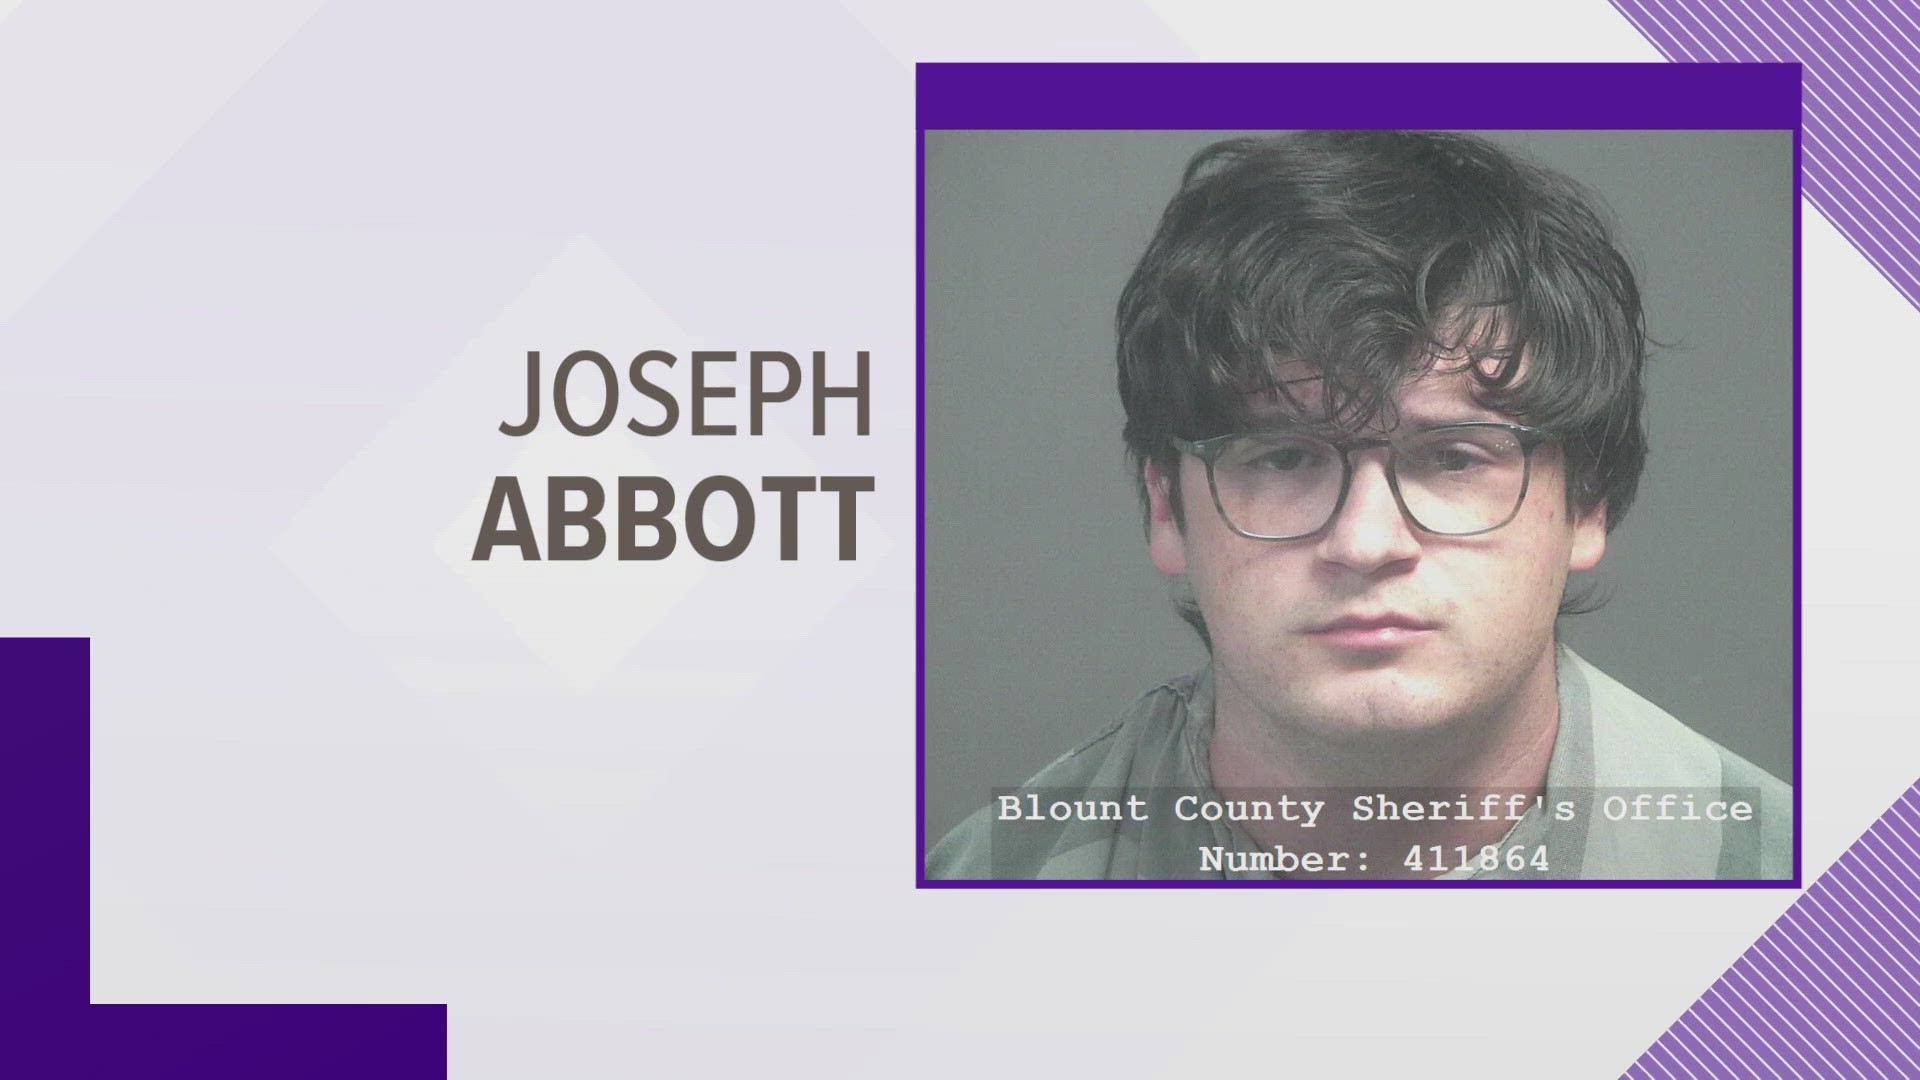 On Feb. 27, a grand jury returned two new sexual battery charges that accused the man of having sexual contact with a child that was at least 13 in Sevier County.